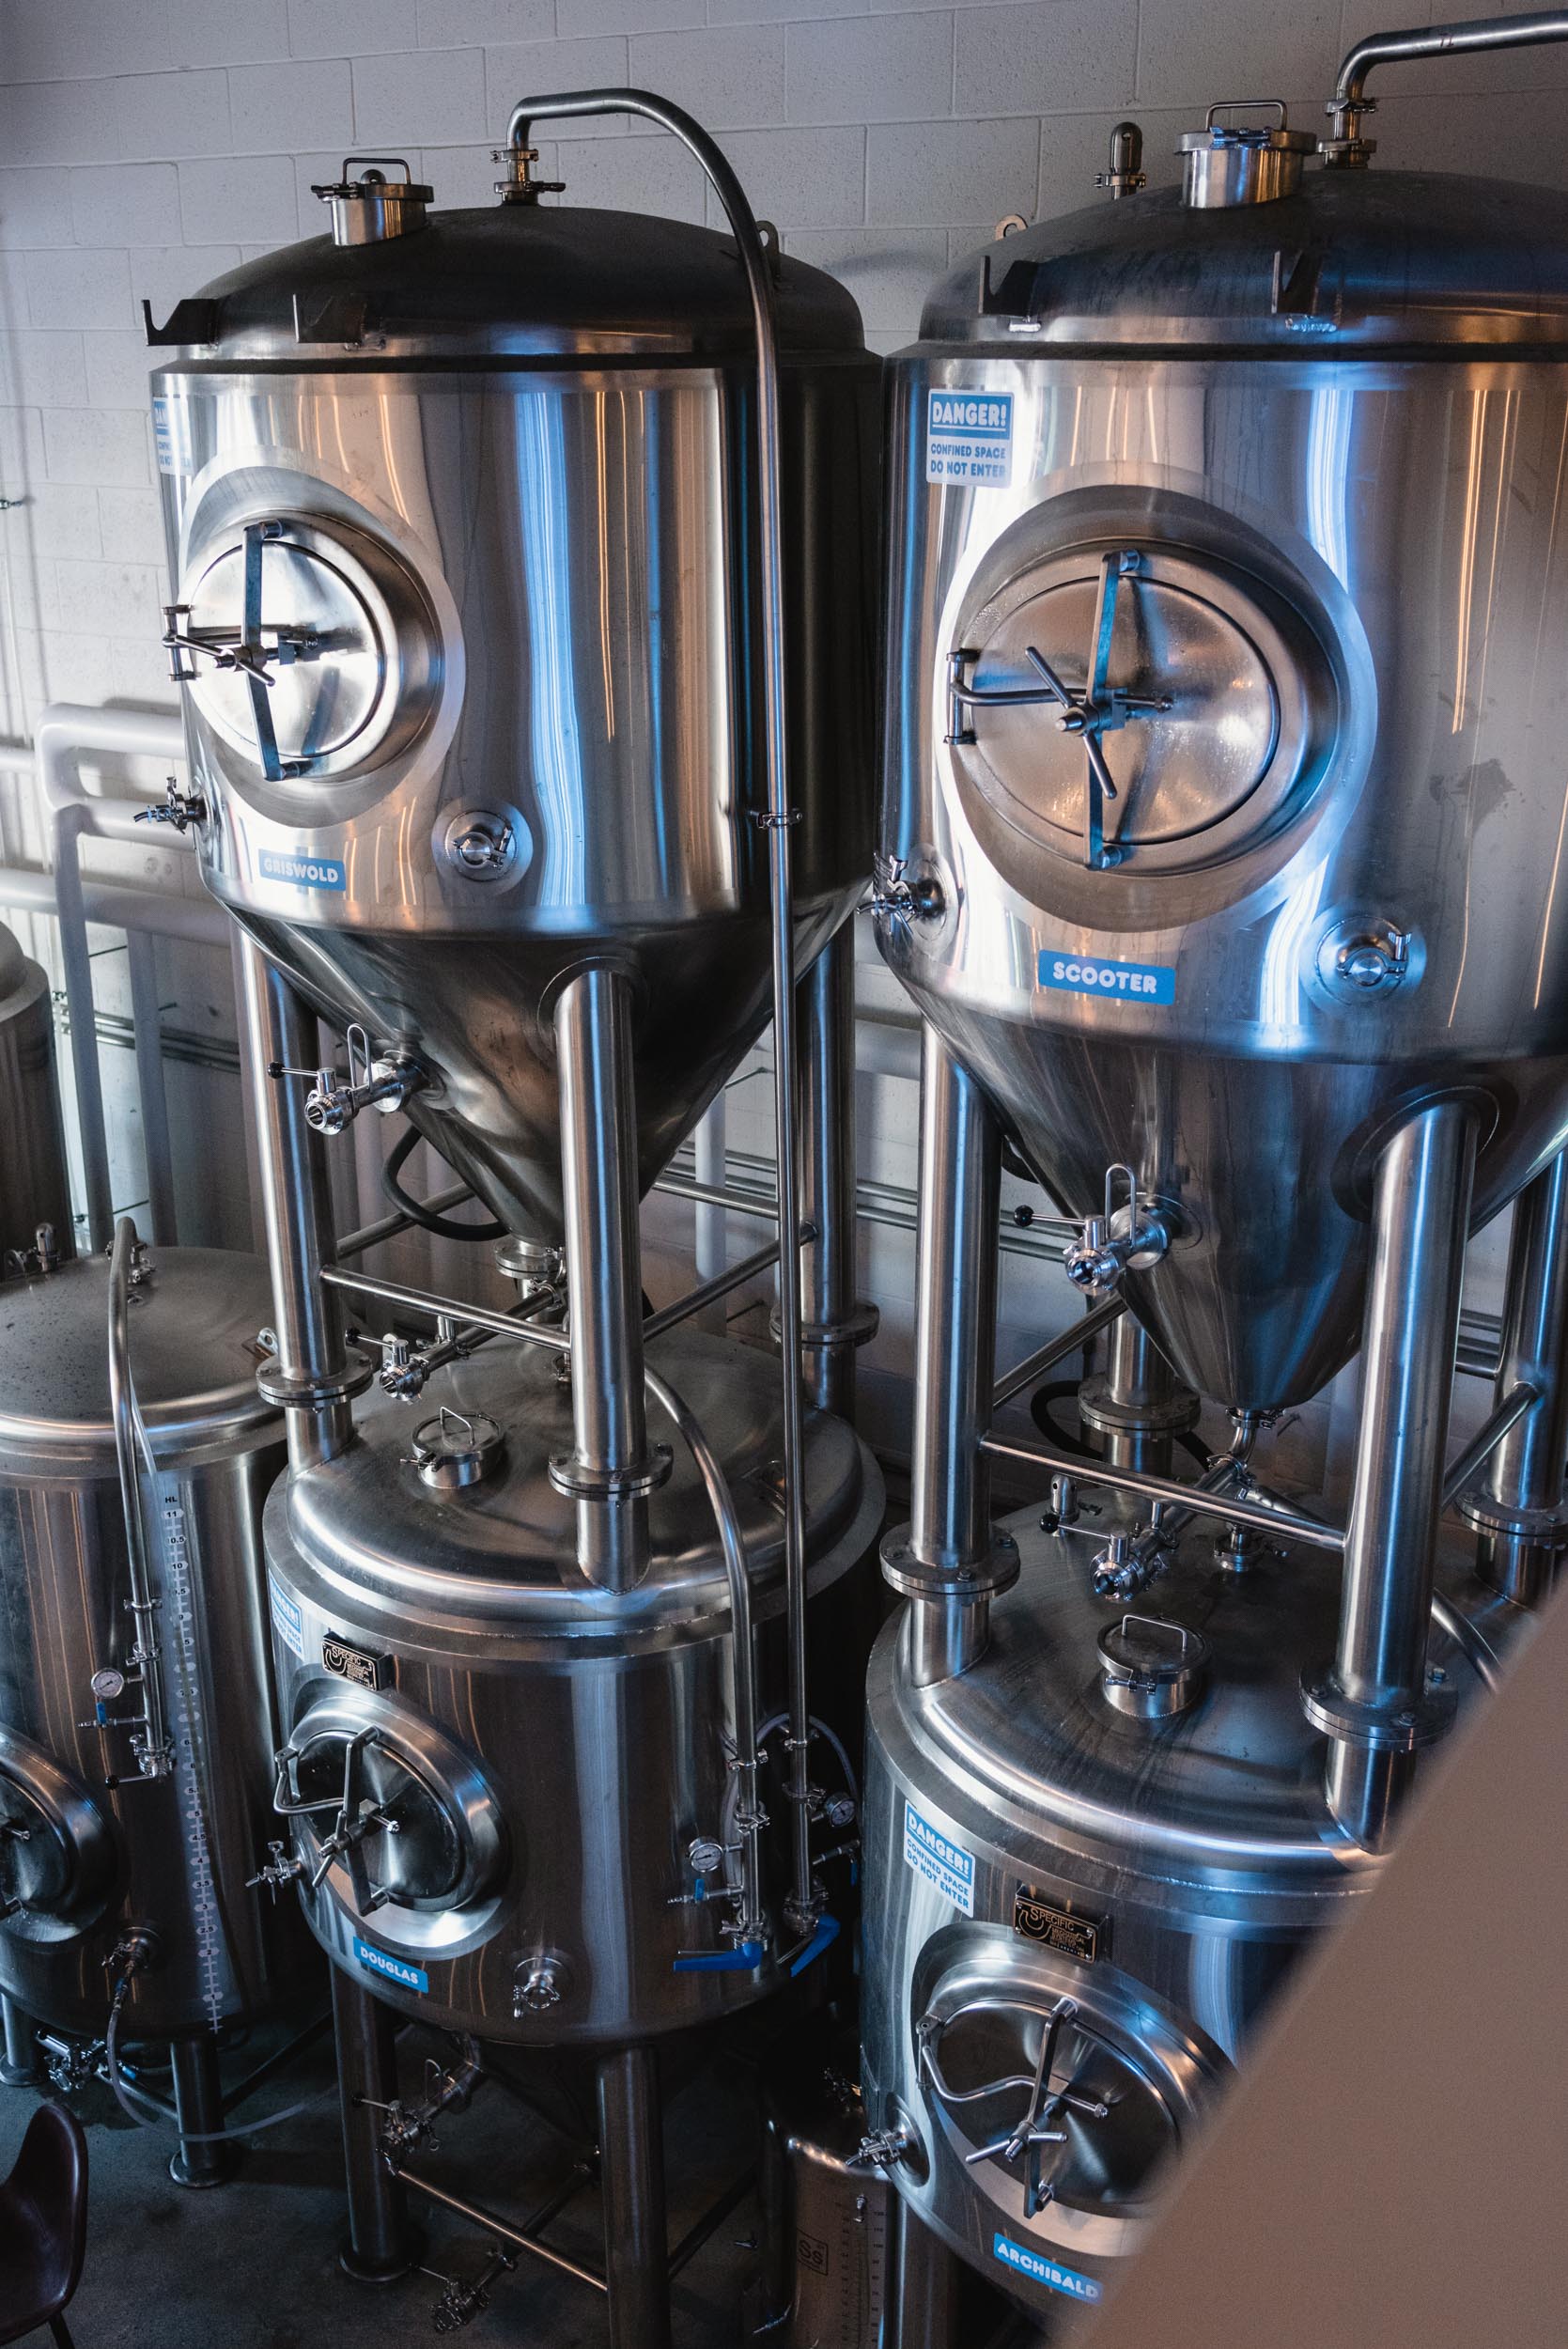 Brewery equipment at Another Beer Company